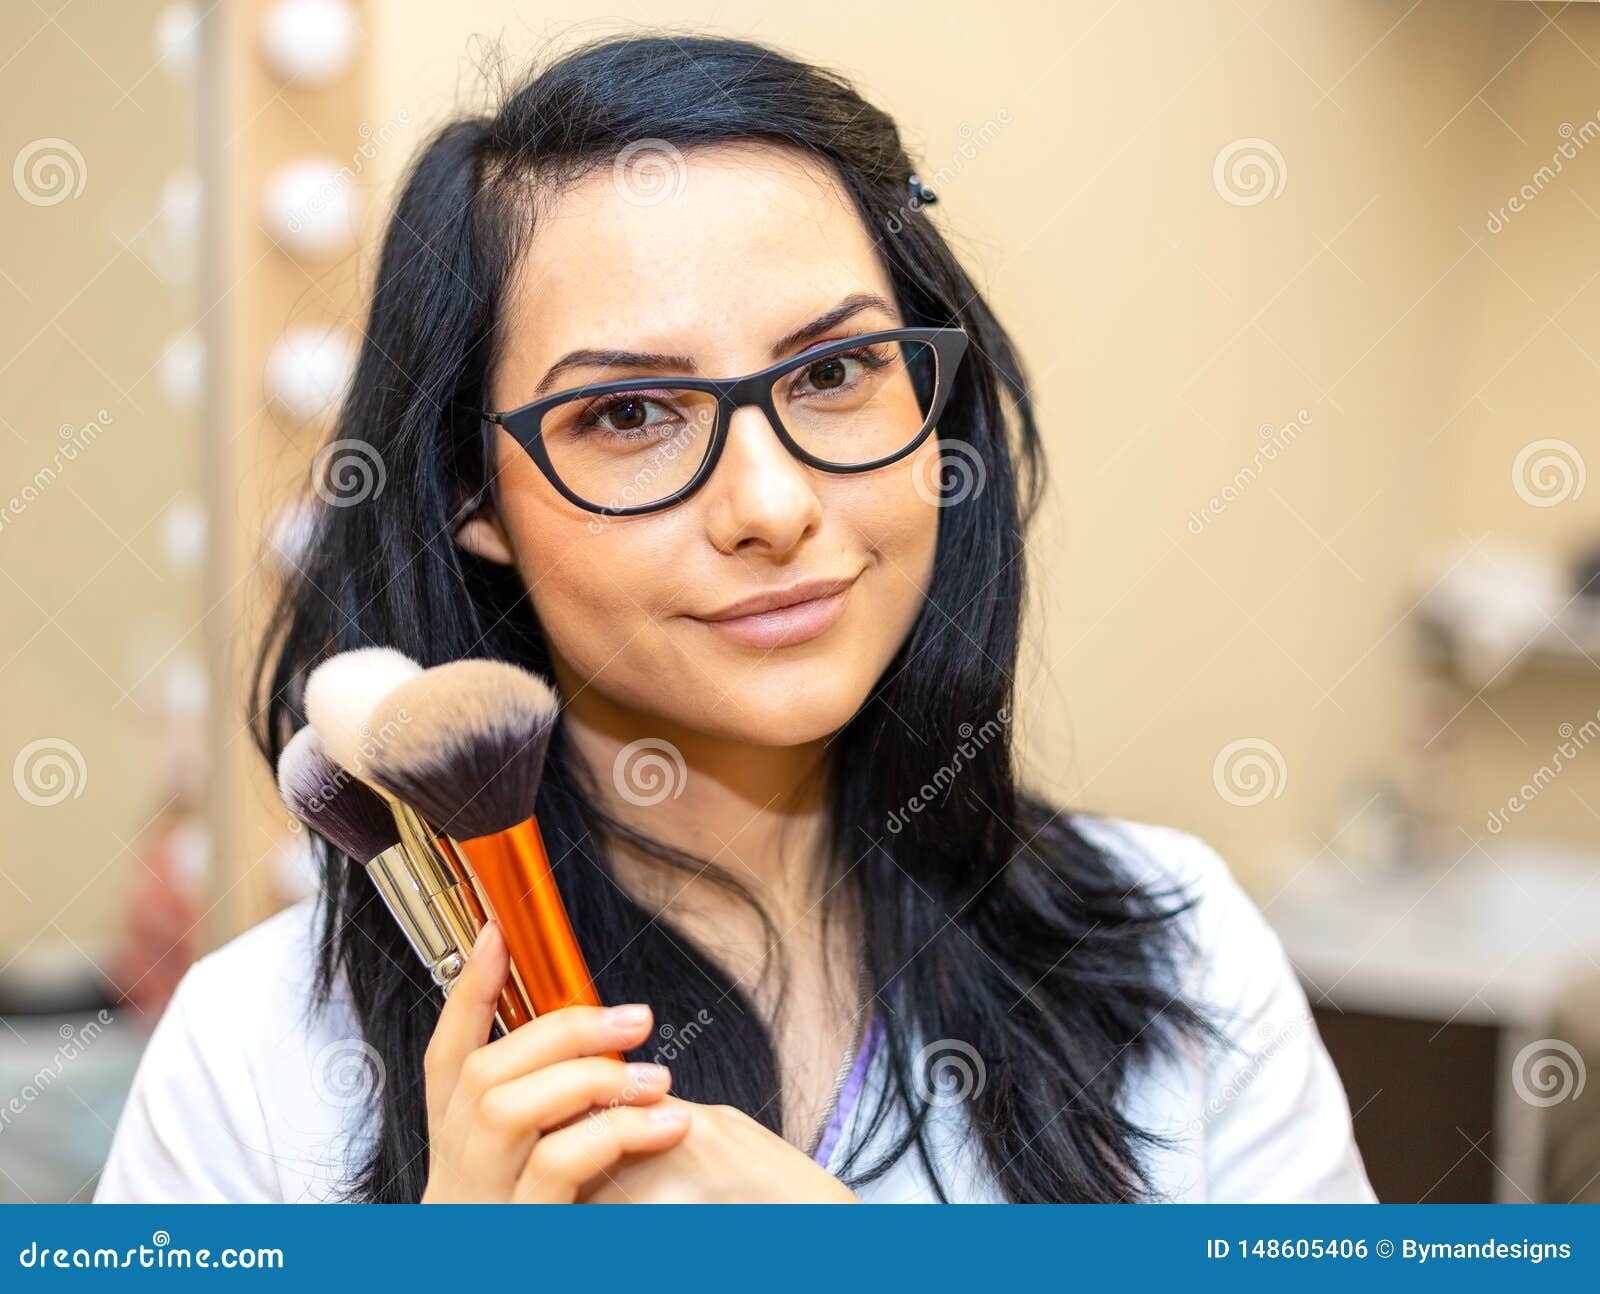 makeup artist holding brushes. makeover. perfect skin